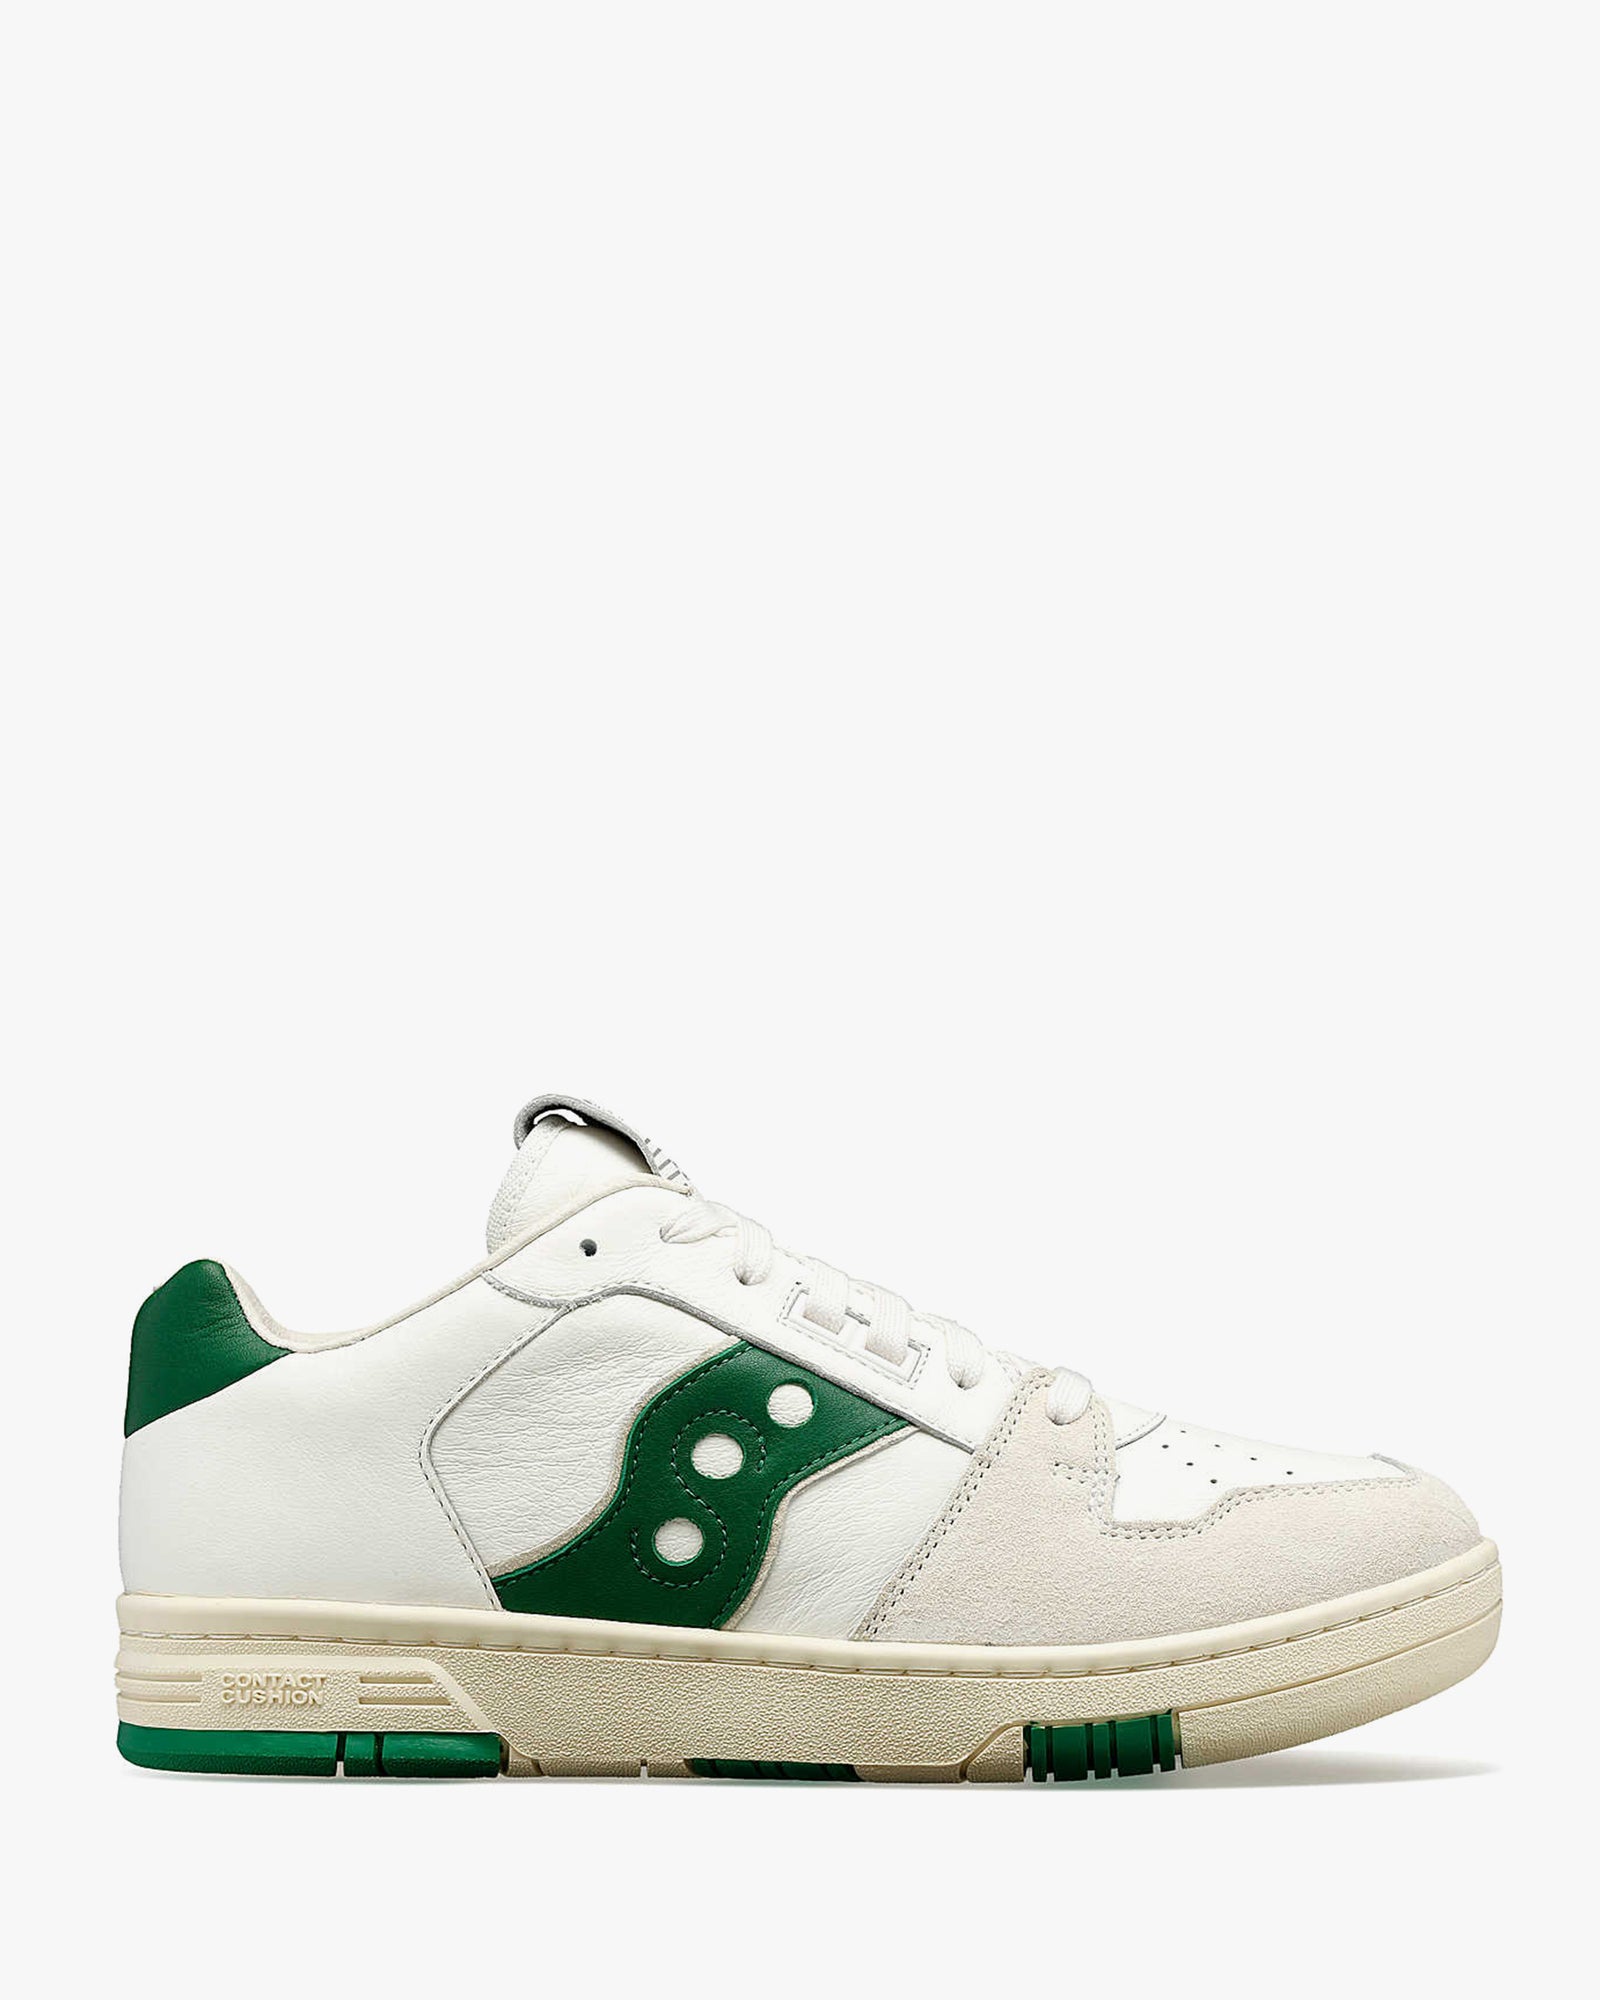 Saucony Sonic Low Sneakers in Green and Beige